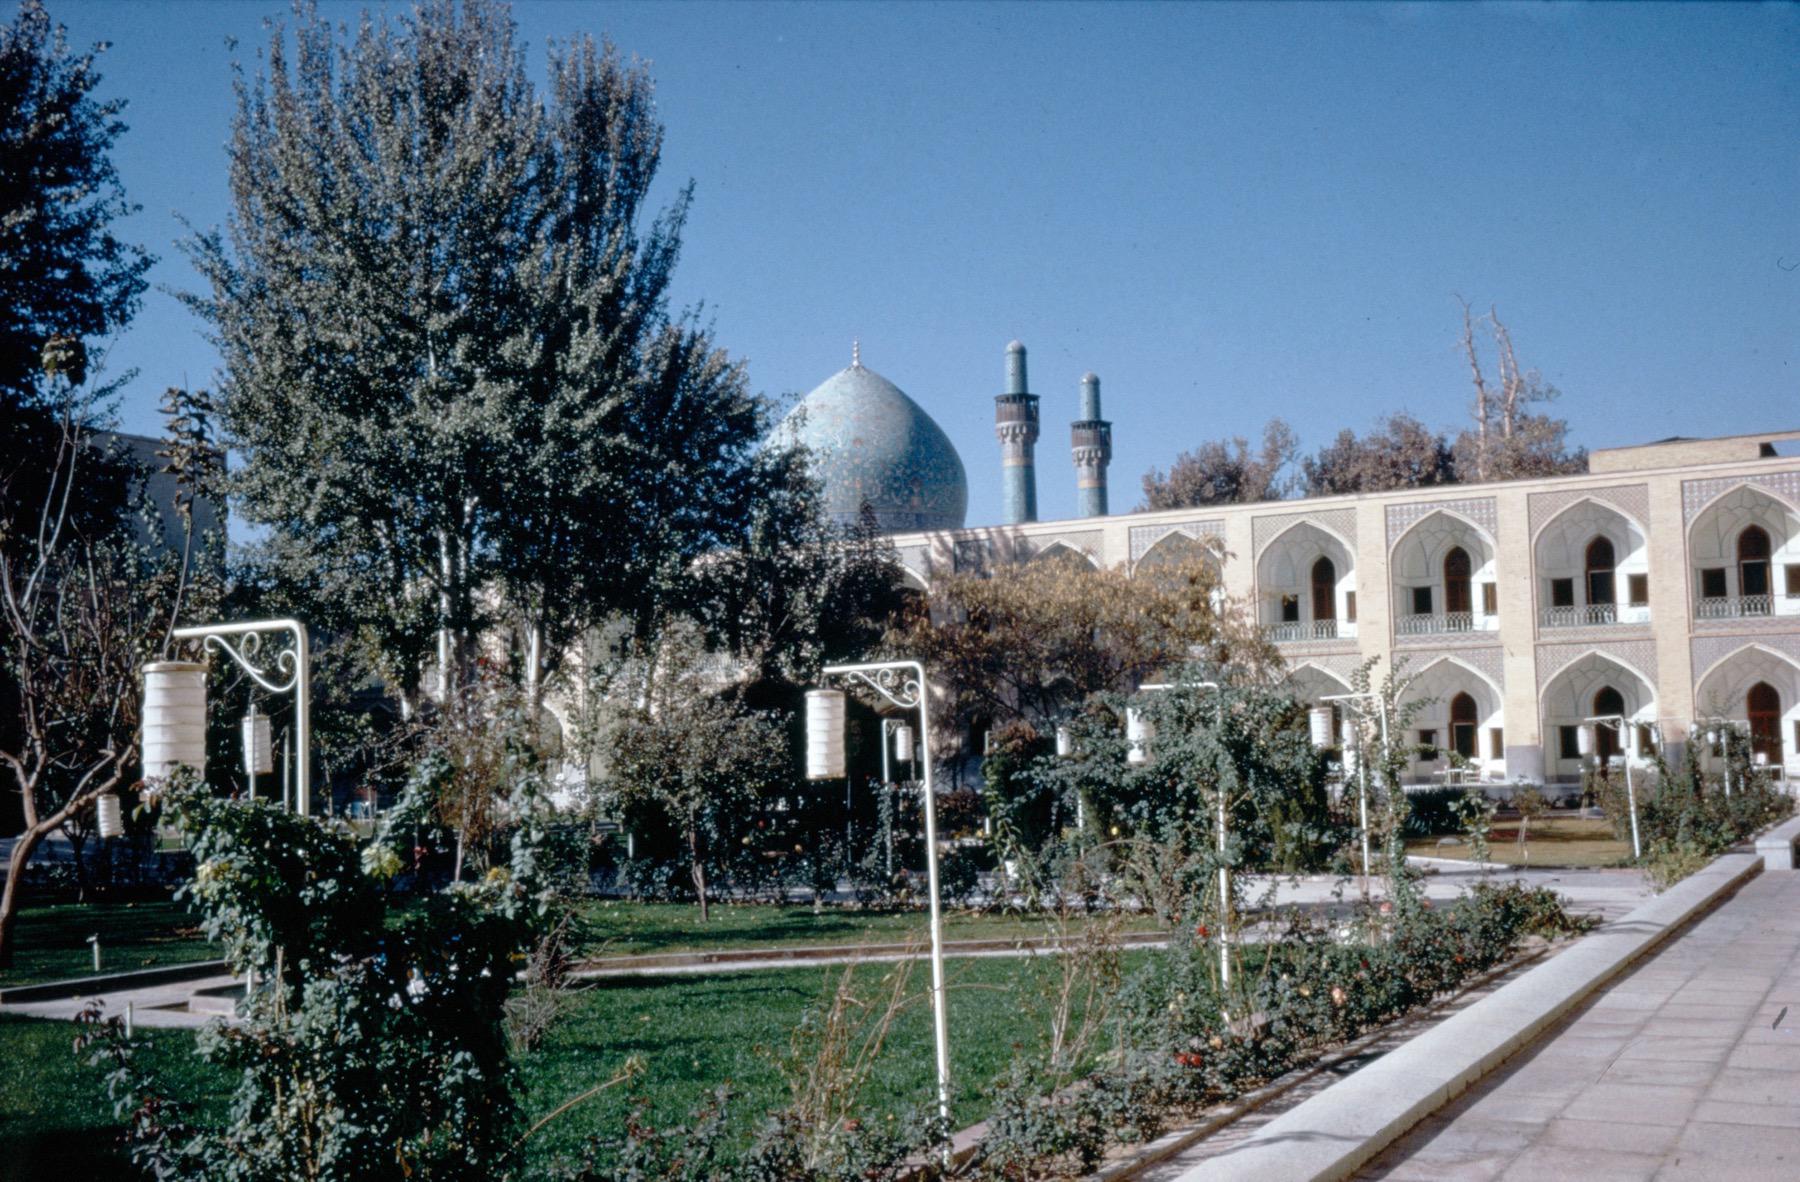 View of former caravanserai courtyard with the dome and minarets of madrasa beyond